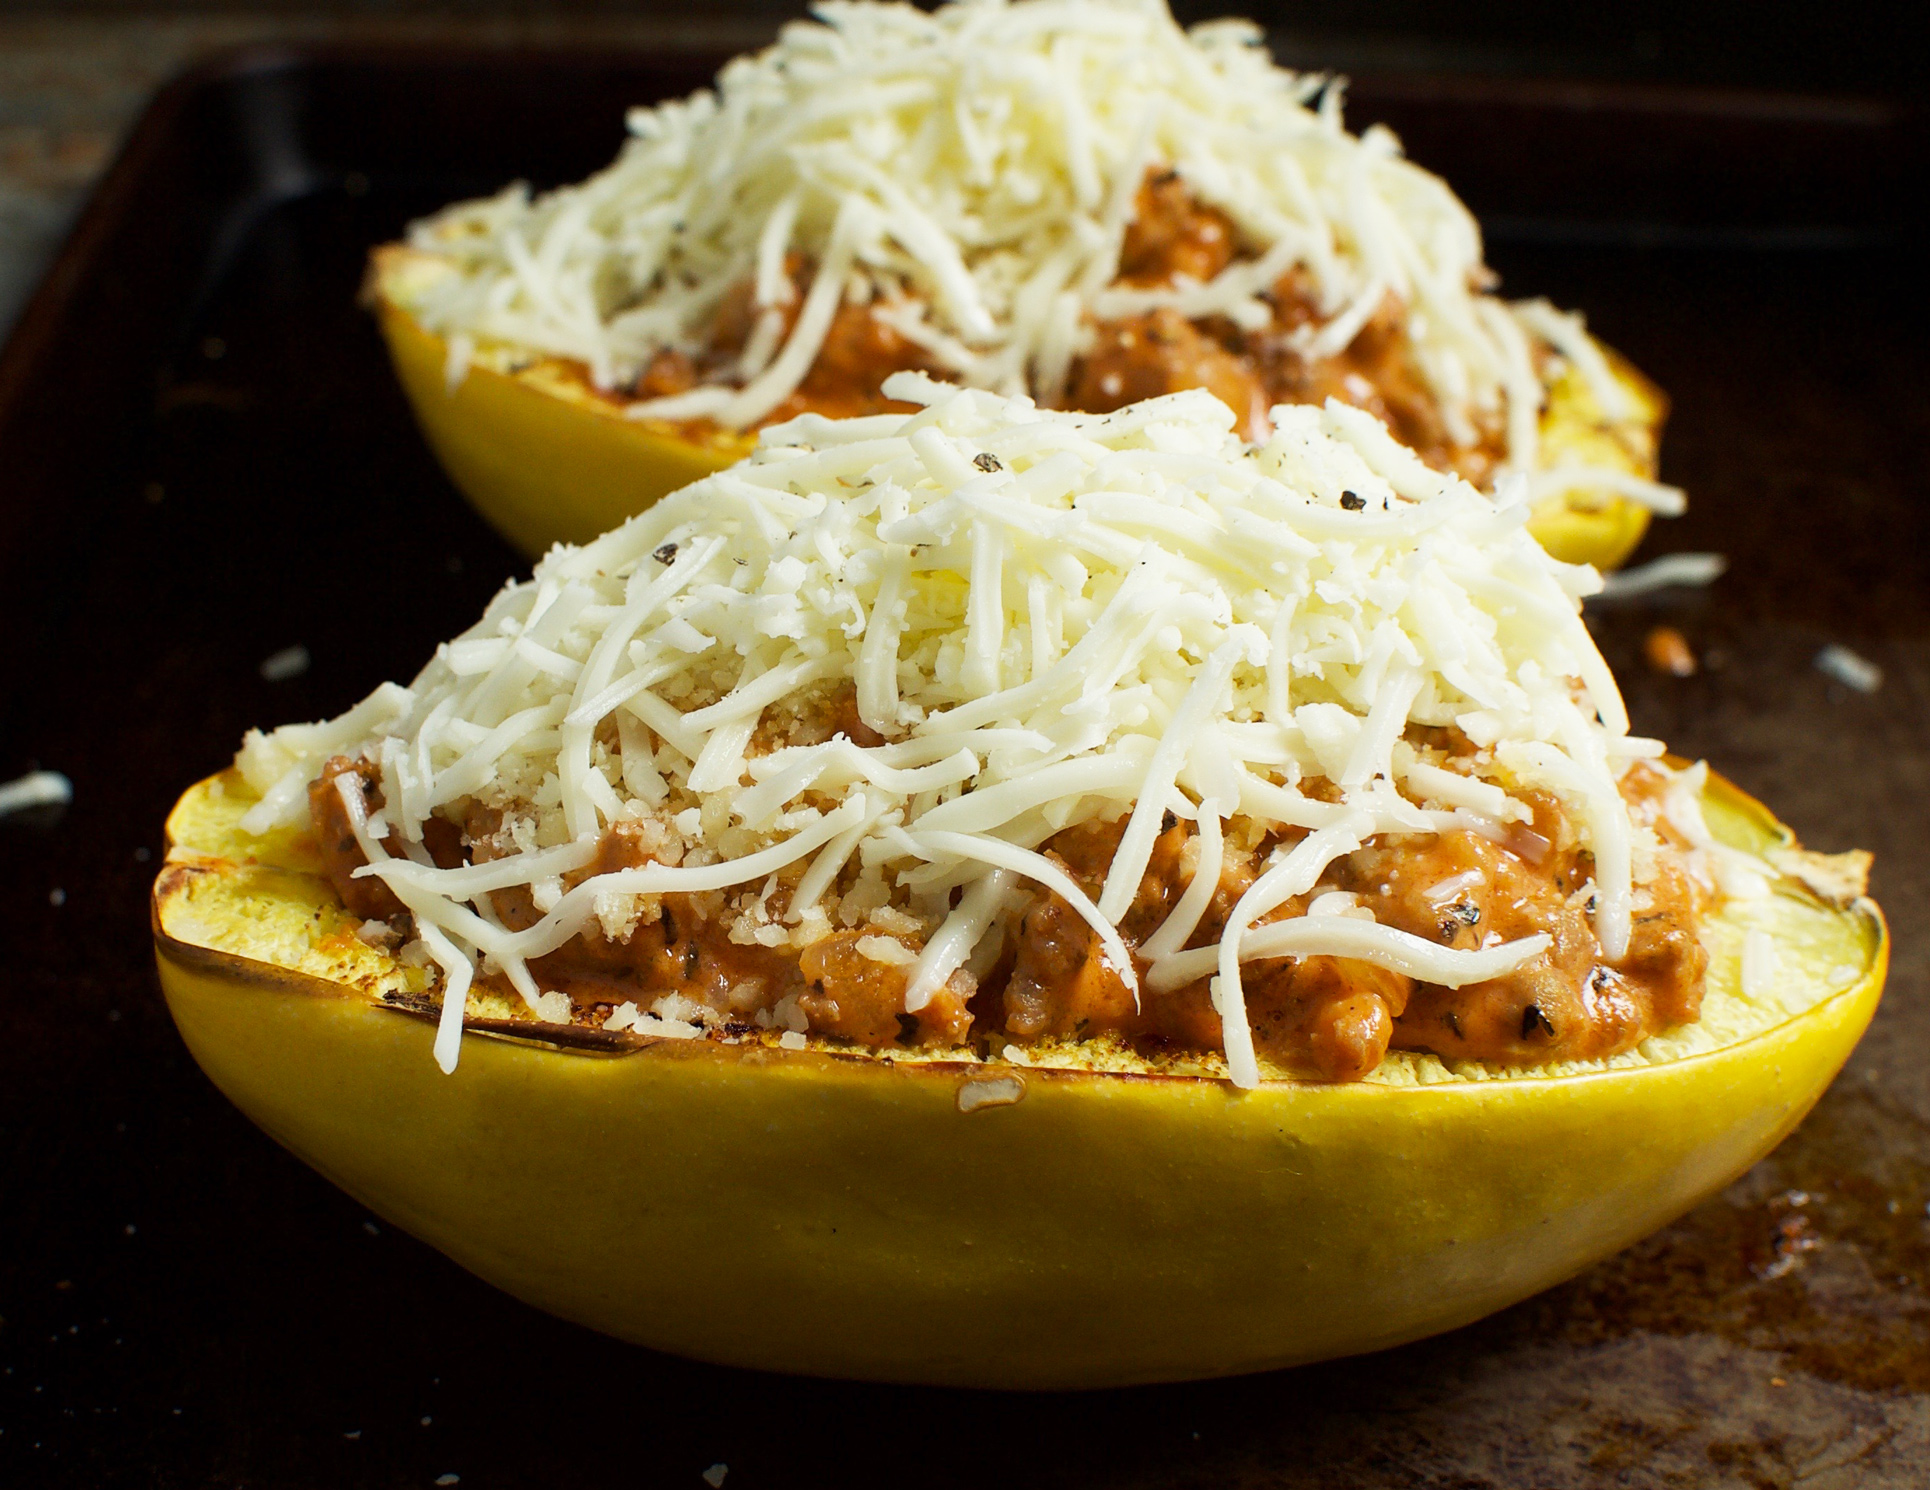 This recipe for Sausage Stuffed Spaghetti Squash takes low-carb eating to a new level! This delicious recipe works for low-carb, ketogenic, gluten-free, grain-free, diabetic, or Banting diets.